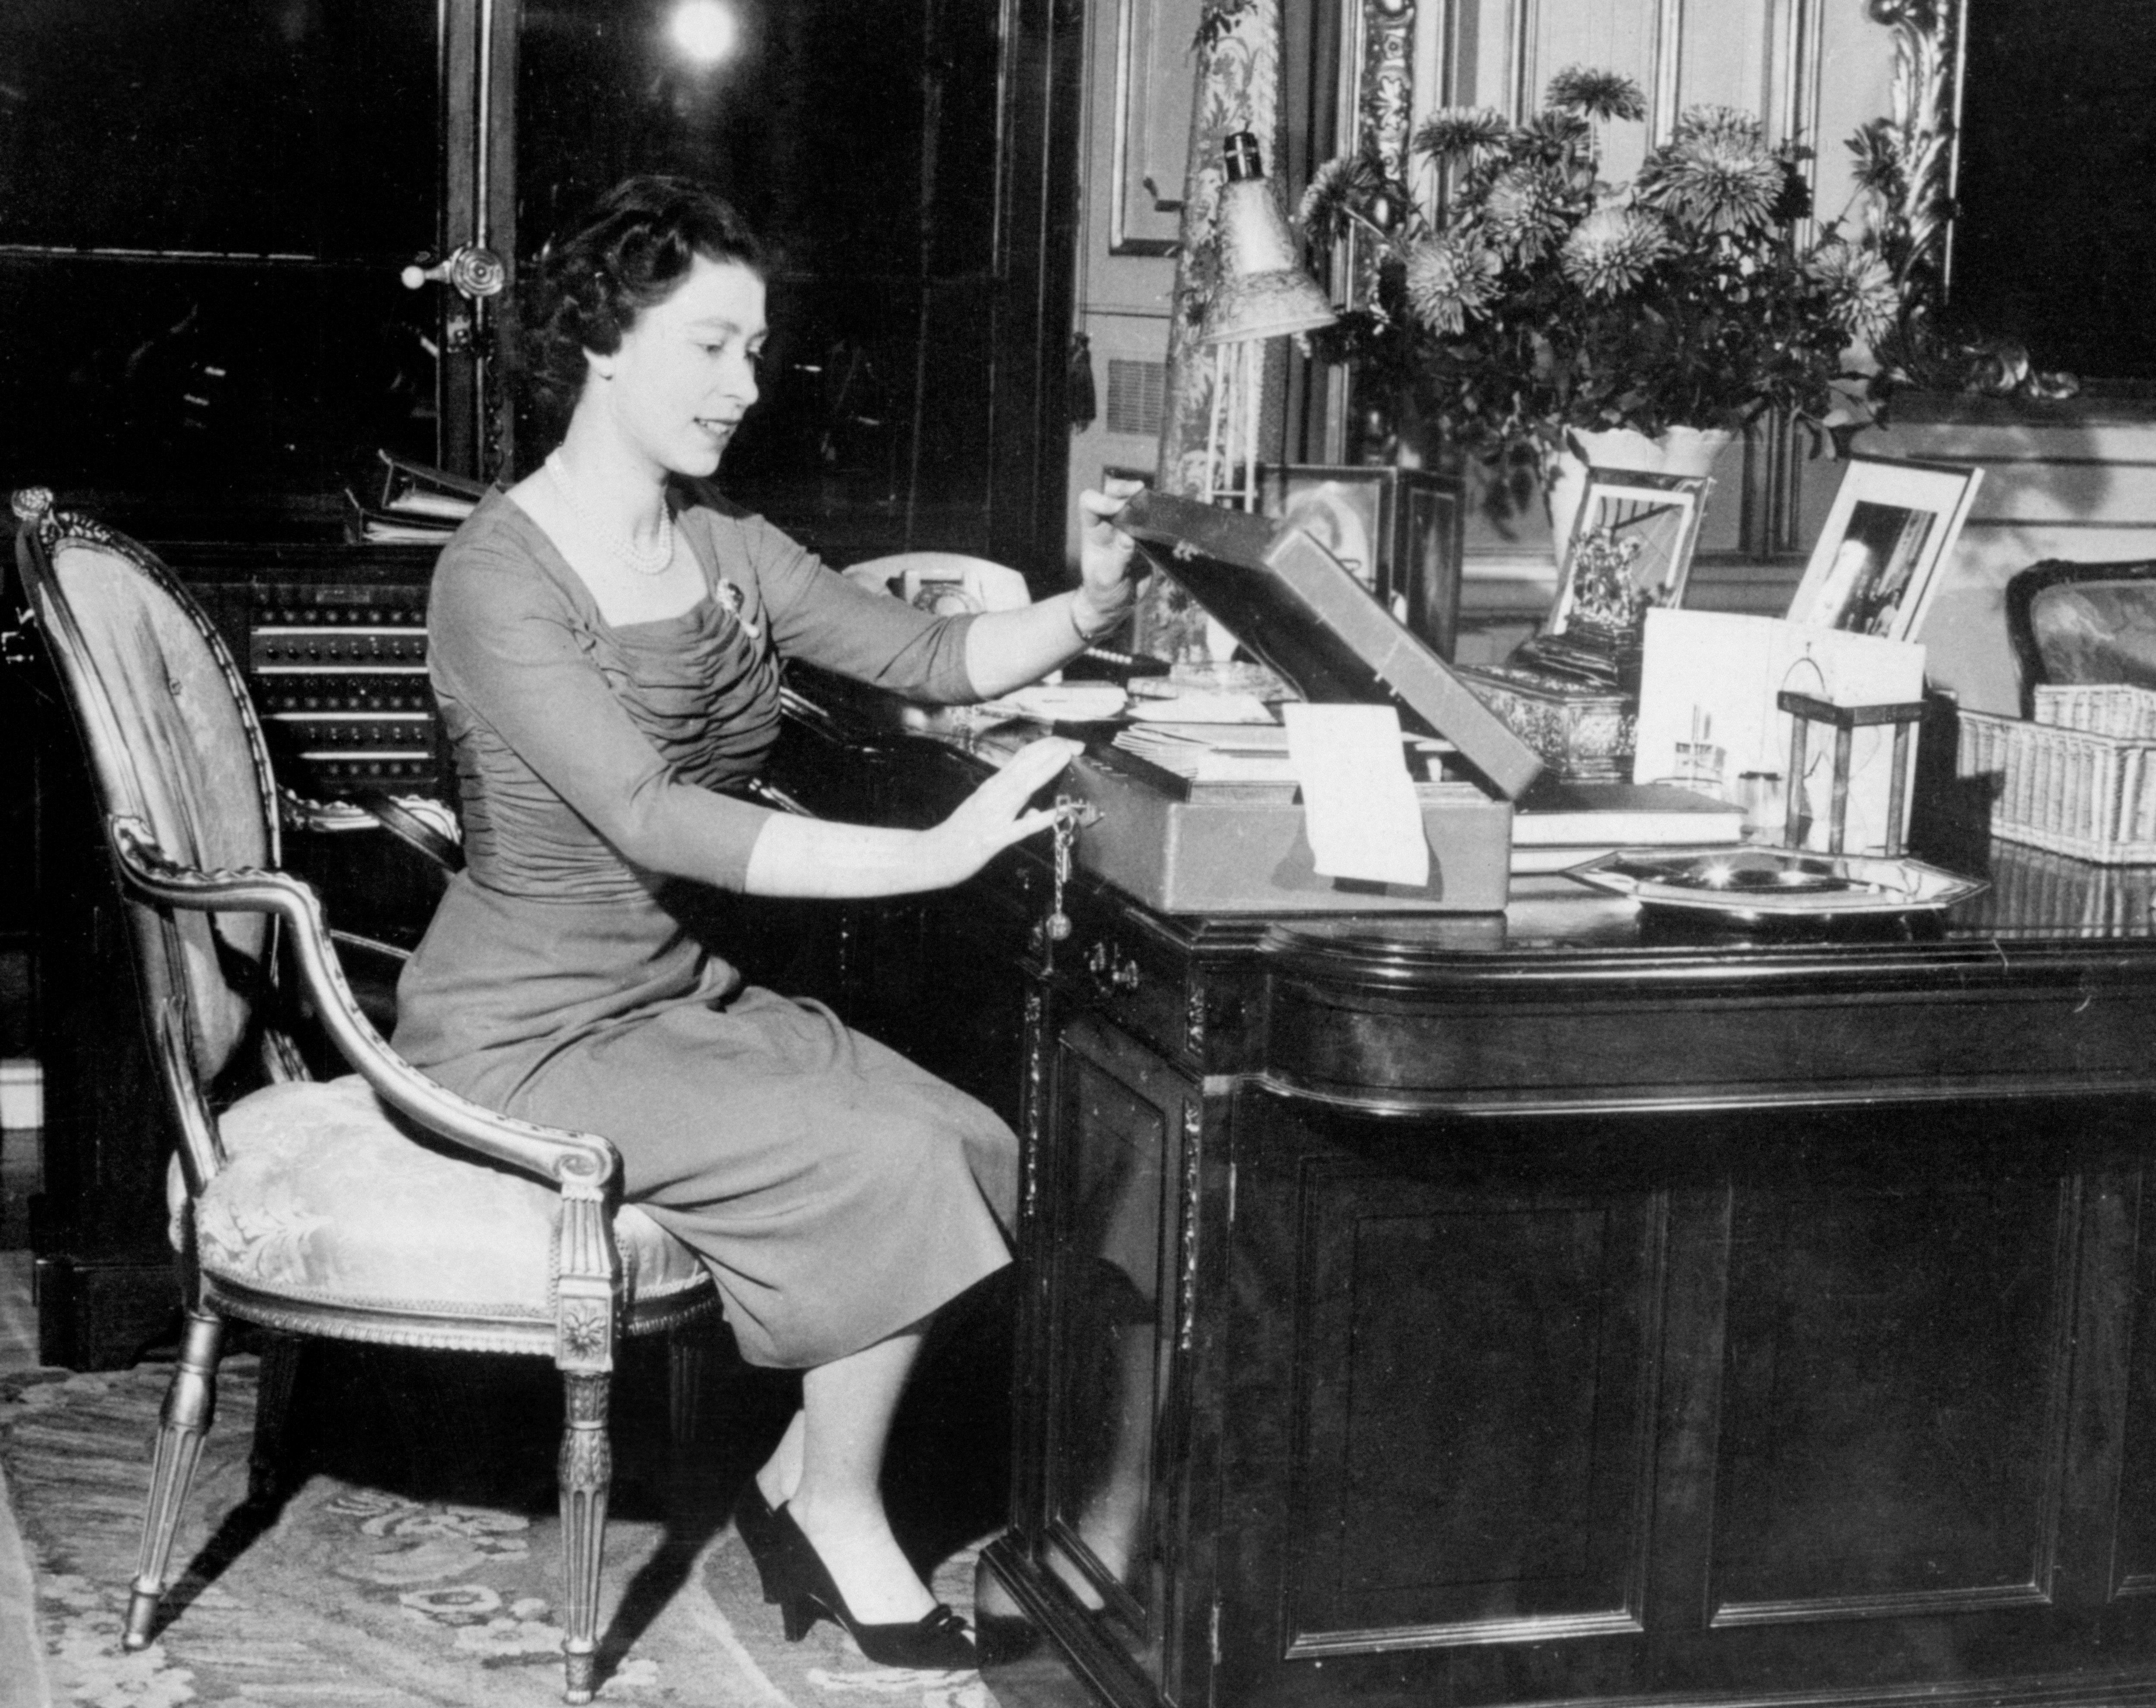 Queen Elizabeth II at work, seated at her desk in Buckingham Palace, London. The Queen is seen opening one of the 'boxes' in which documents and papers, sorted for her attention, are sent upstairs by the Private Secretary. Behind the Queen is the Palace switchboard.